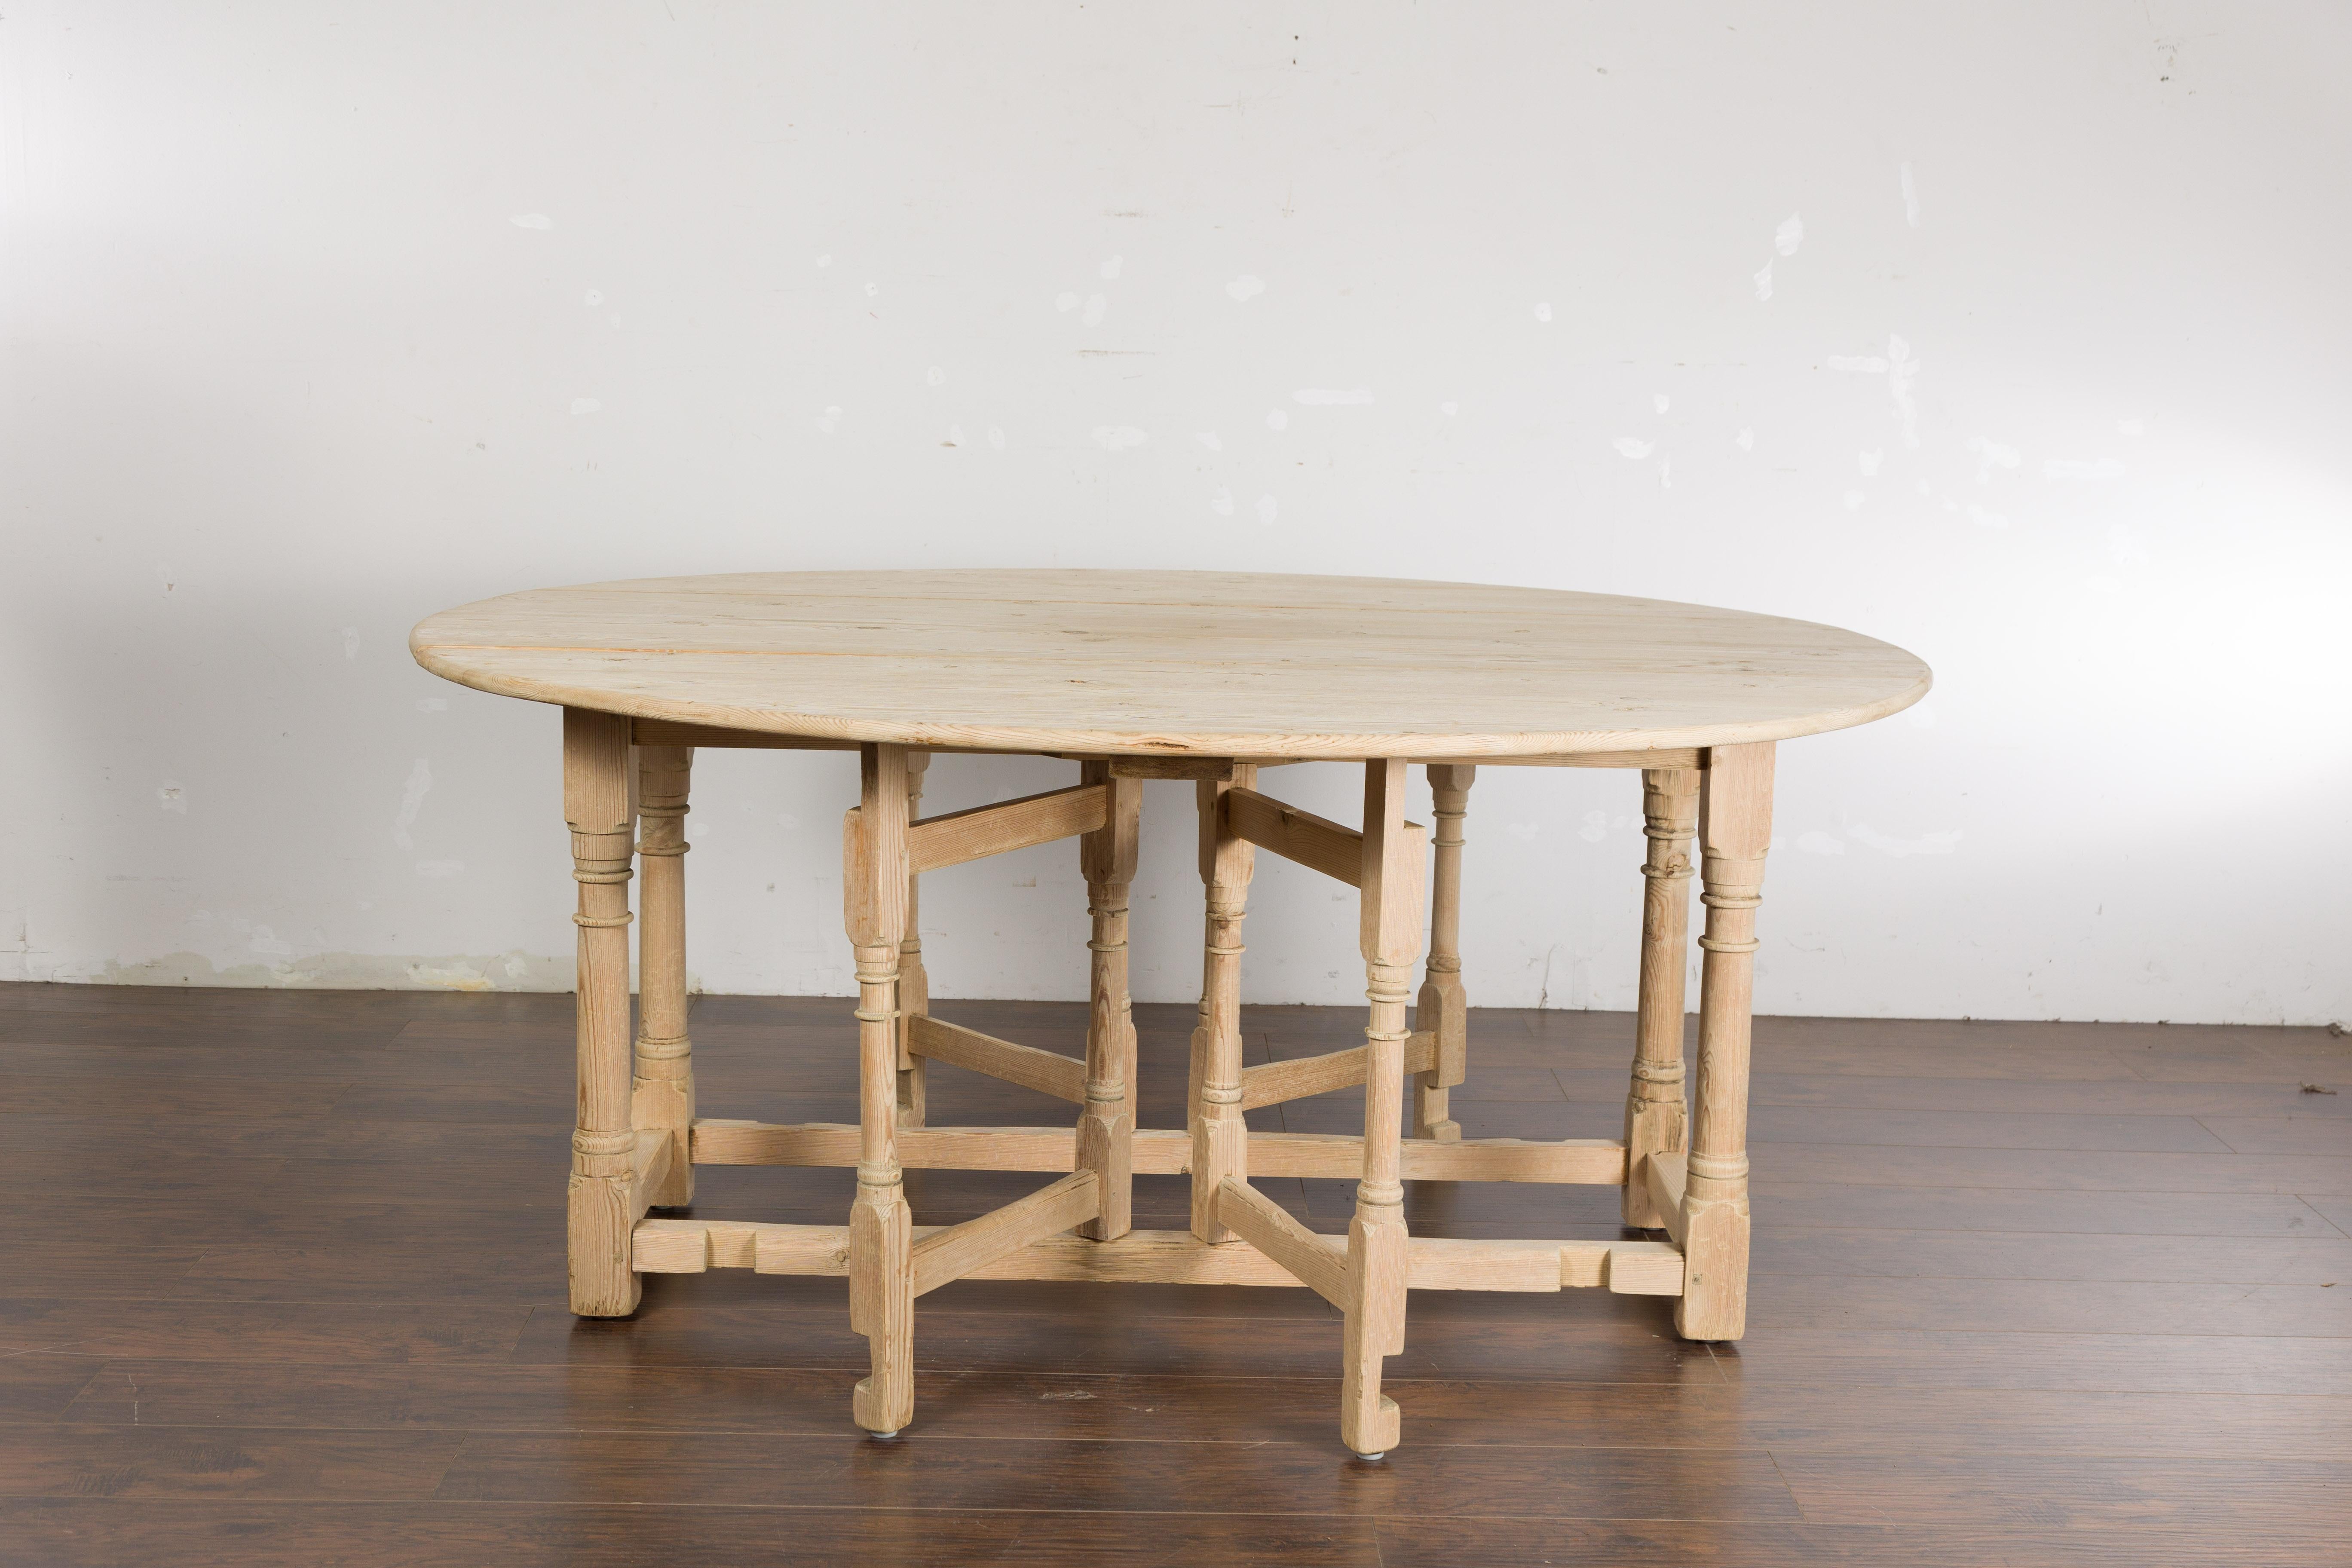 Rustic English 19th Century Pine Drop Leaf Round Top Table with Turned Legs For Sale 2